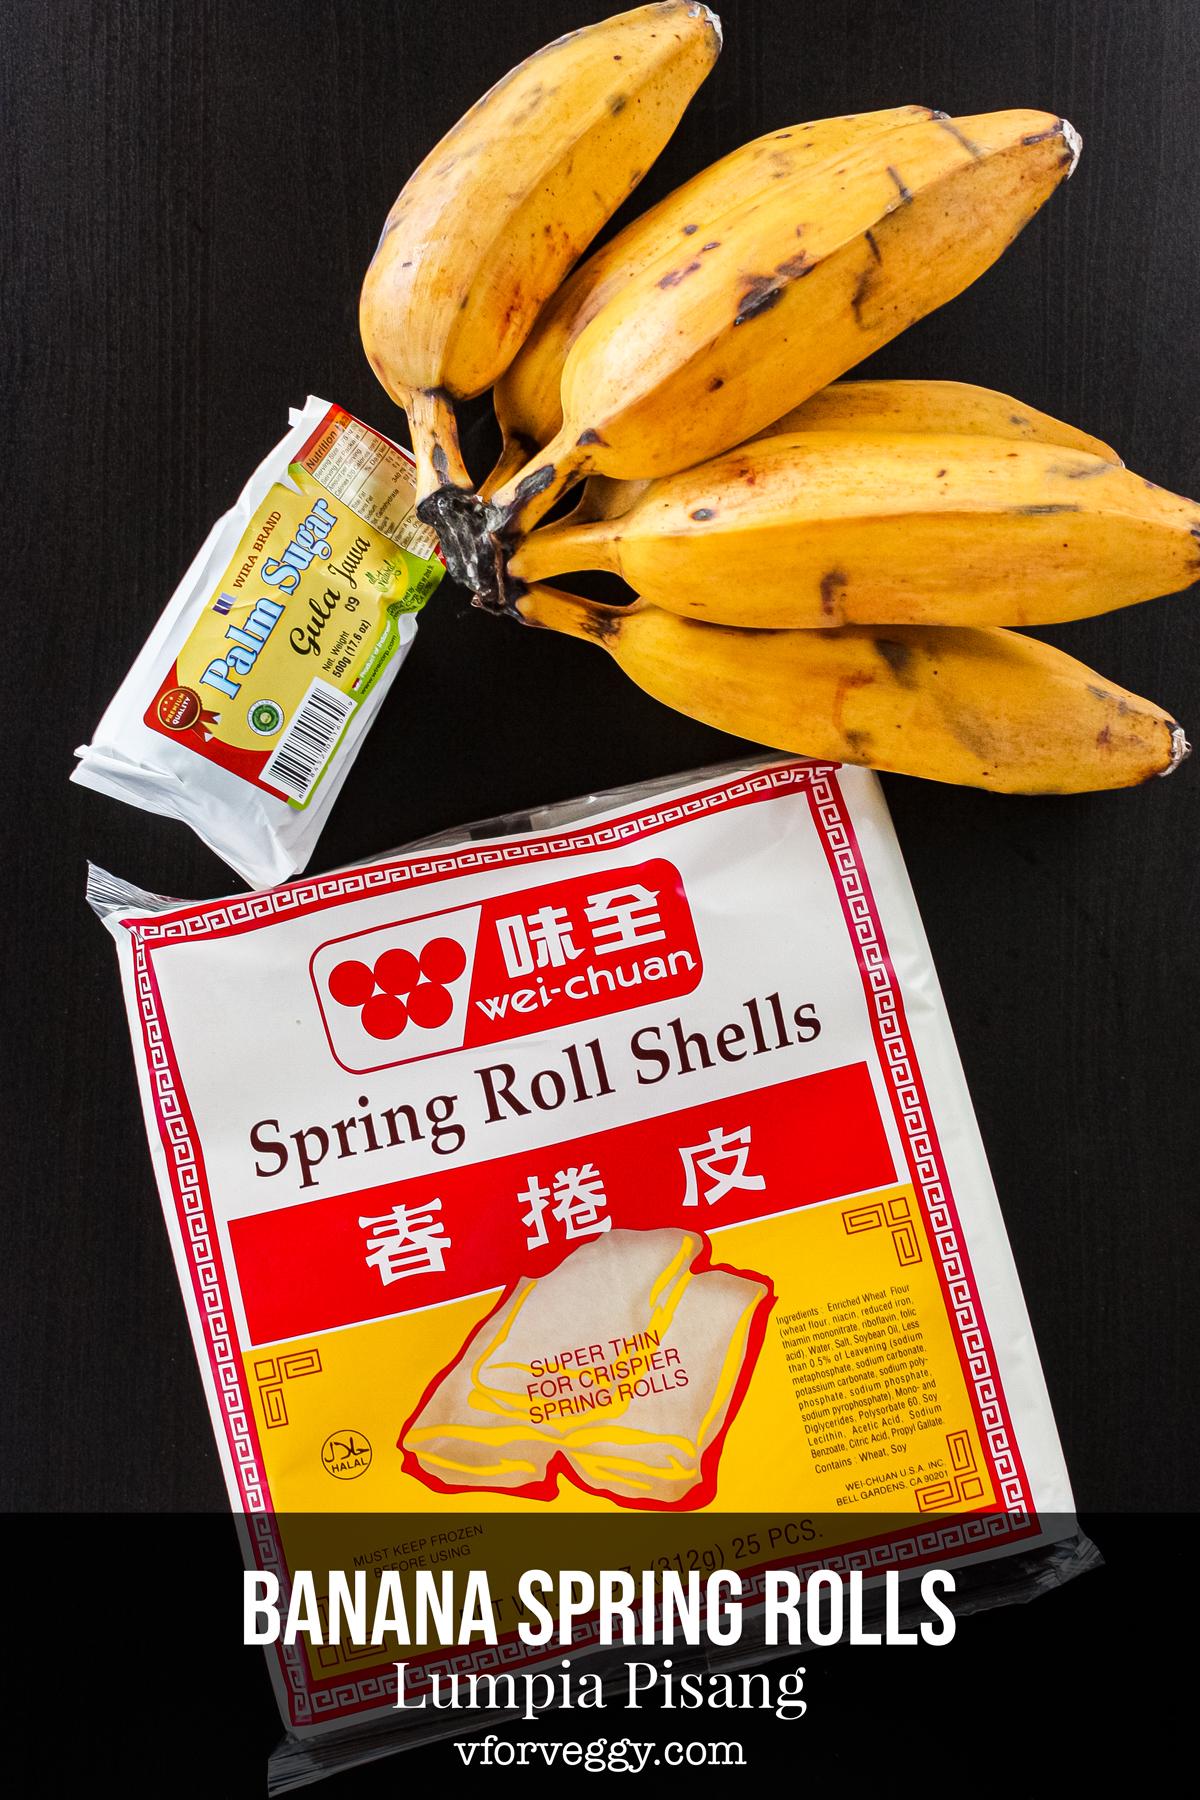 Ingredients for banana spring rolls: saba bananas, palm sugar, and spring roll wrappers.